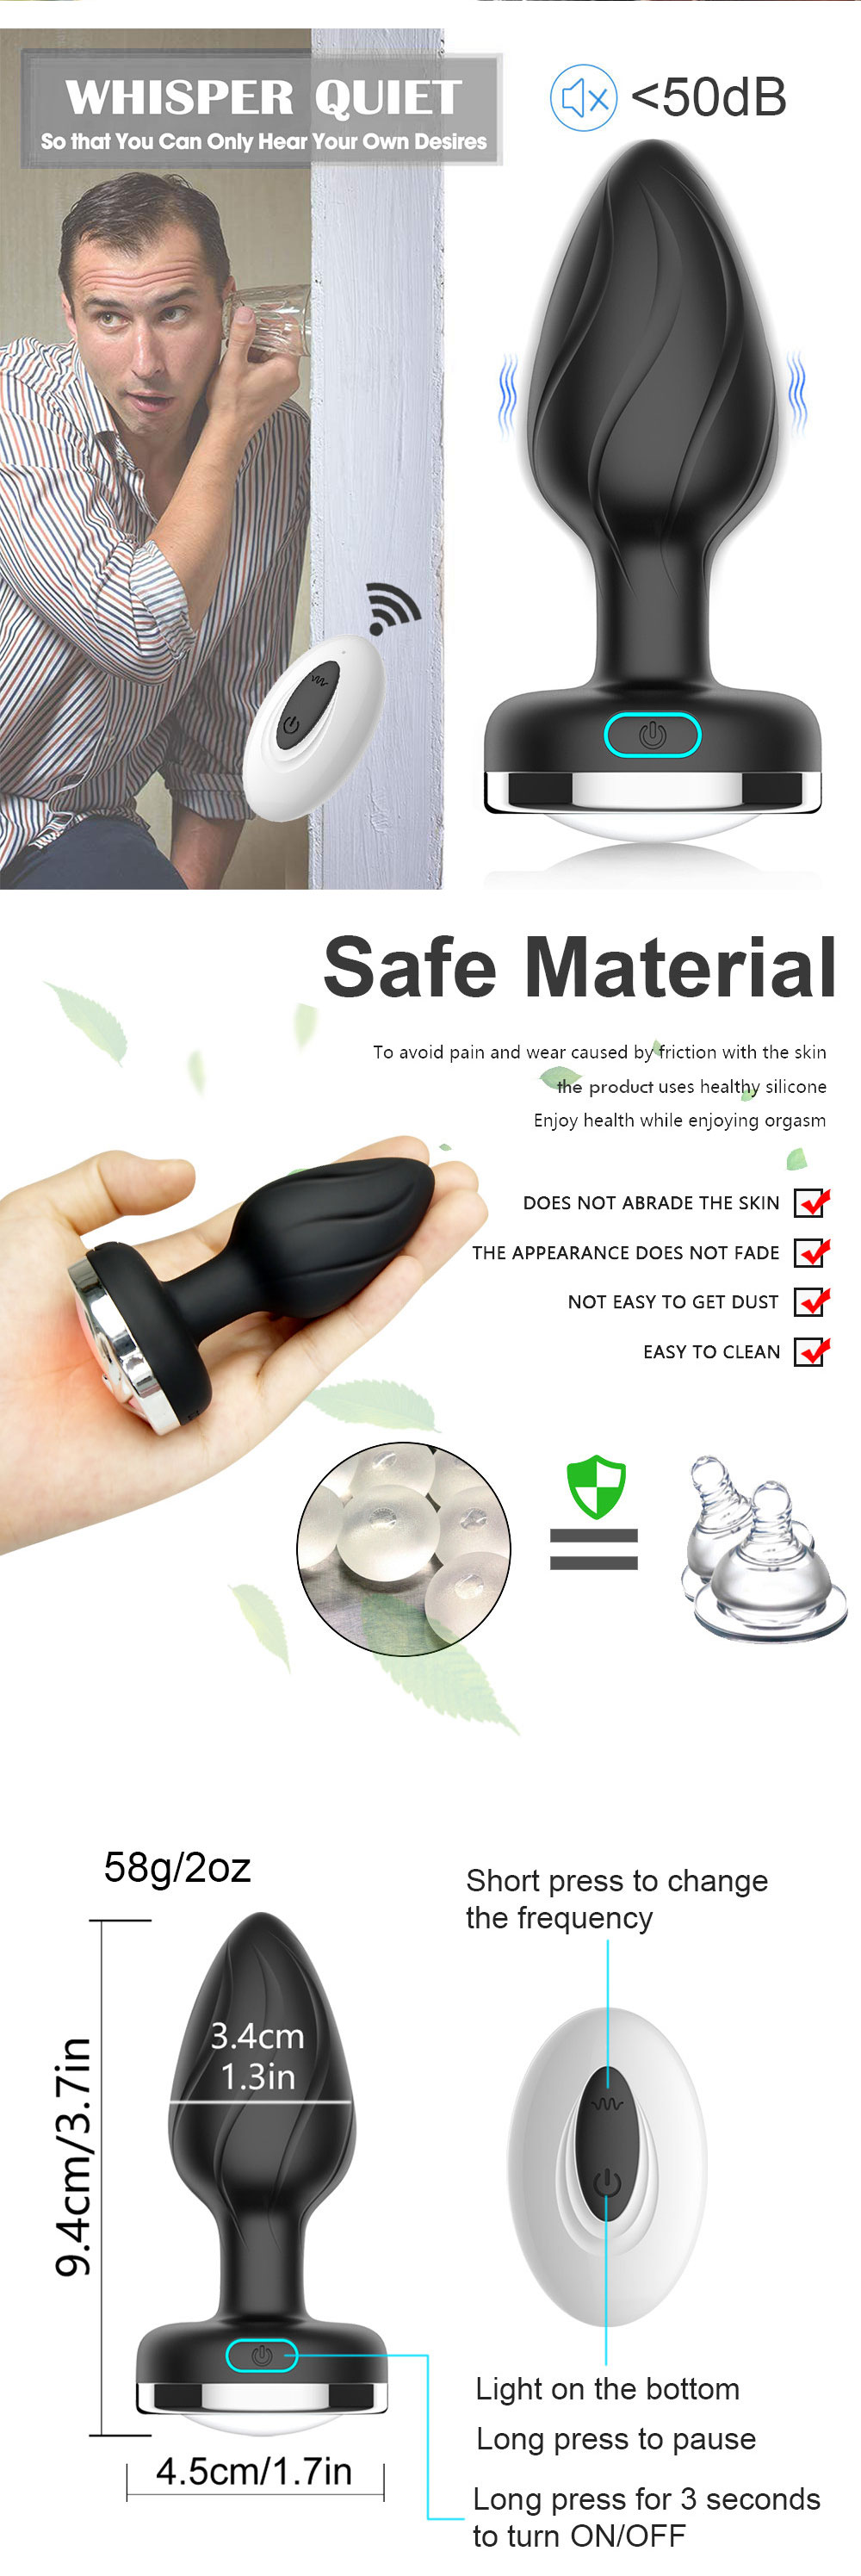 Vibration Led Butt Plug With Remote Control 1